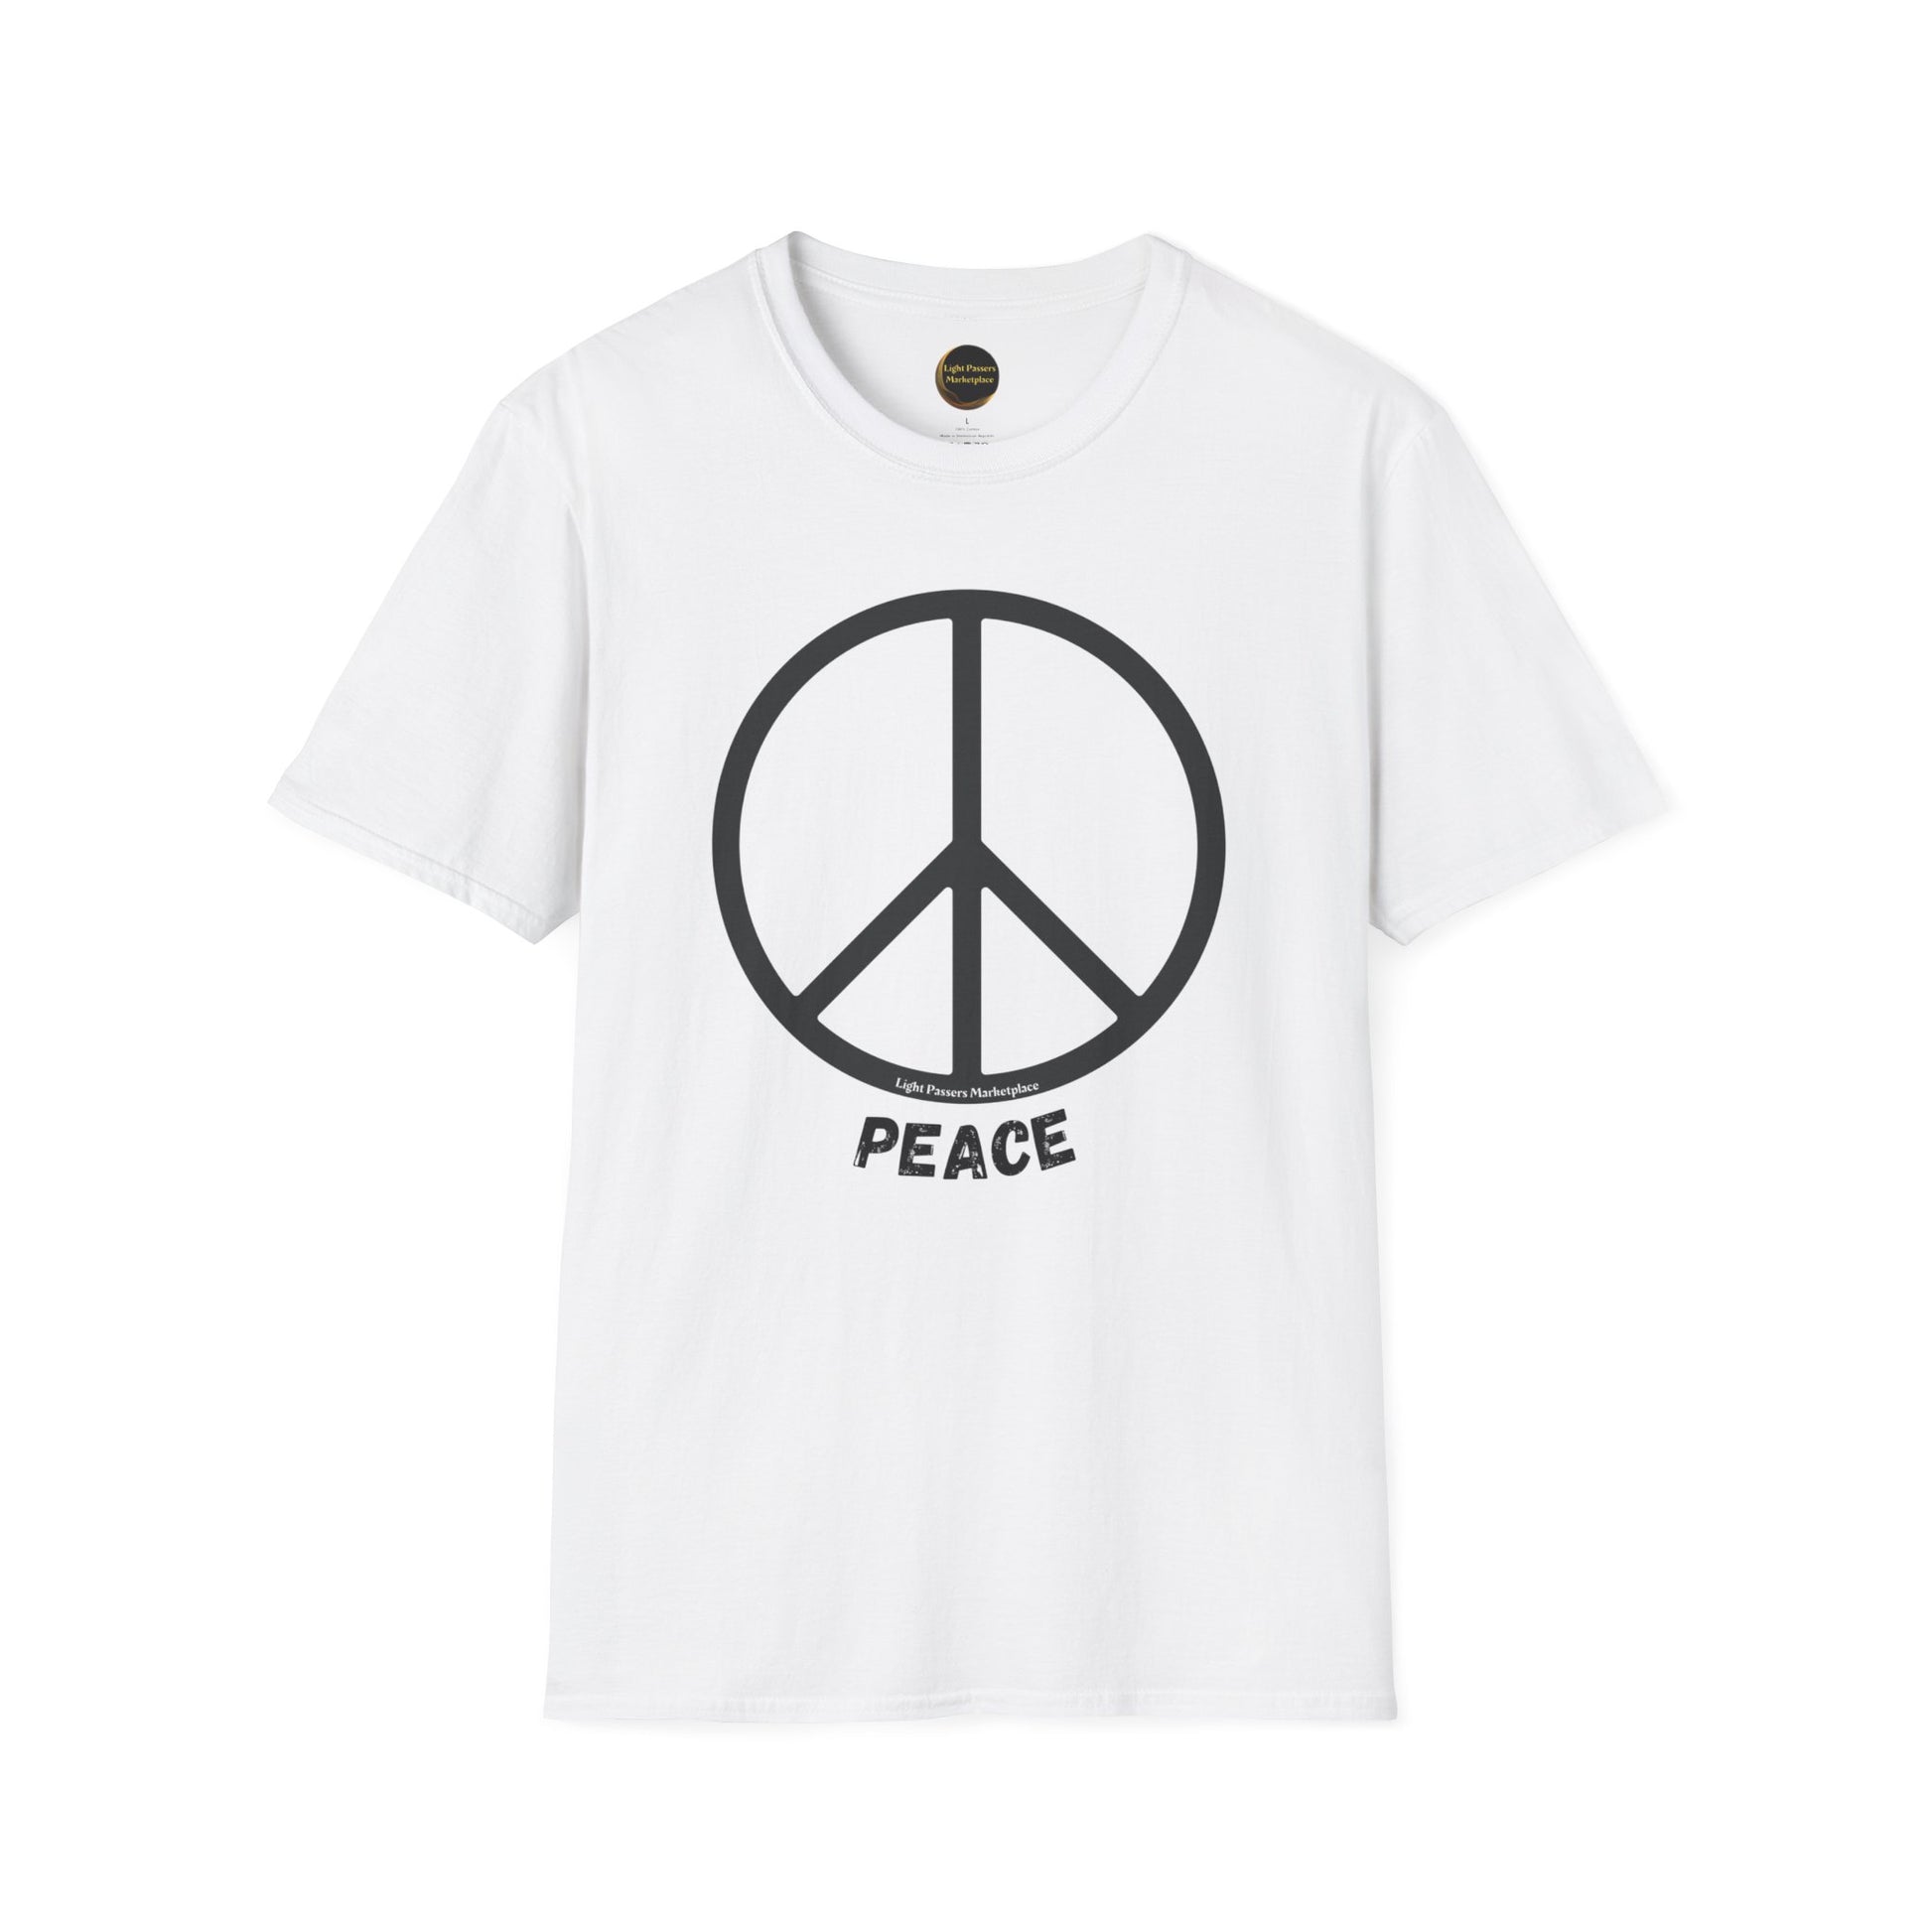 A white unisex t-shirt featuring a peace symbol, made of soft 100% cotton with twill tape shoulders for durability, no side seams, and ribbed collar. Lightweight and versatile for year-round wear. Ethically sourced and Oeko-Tex certified.